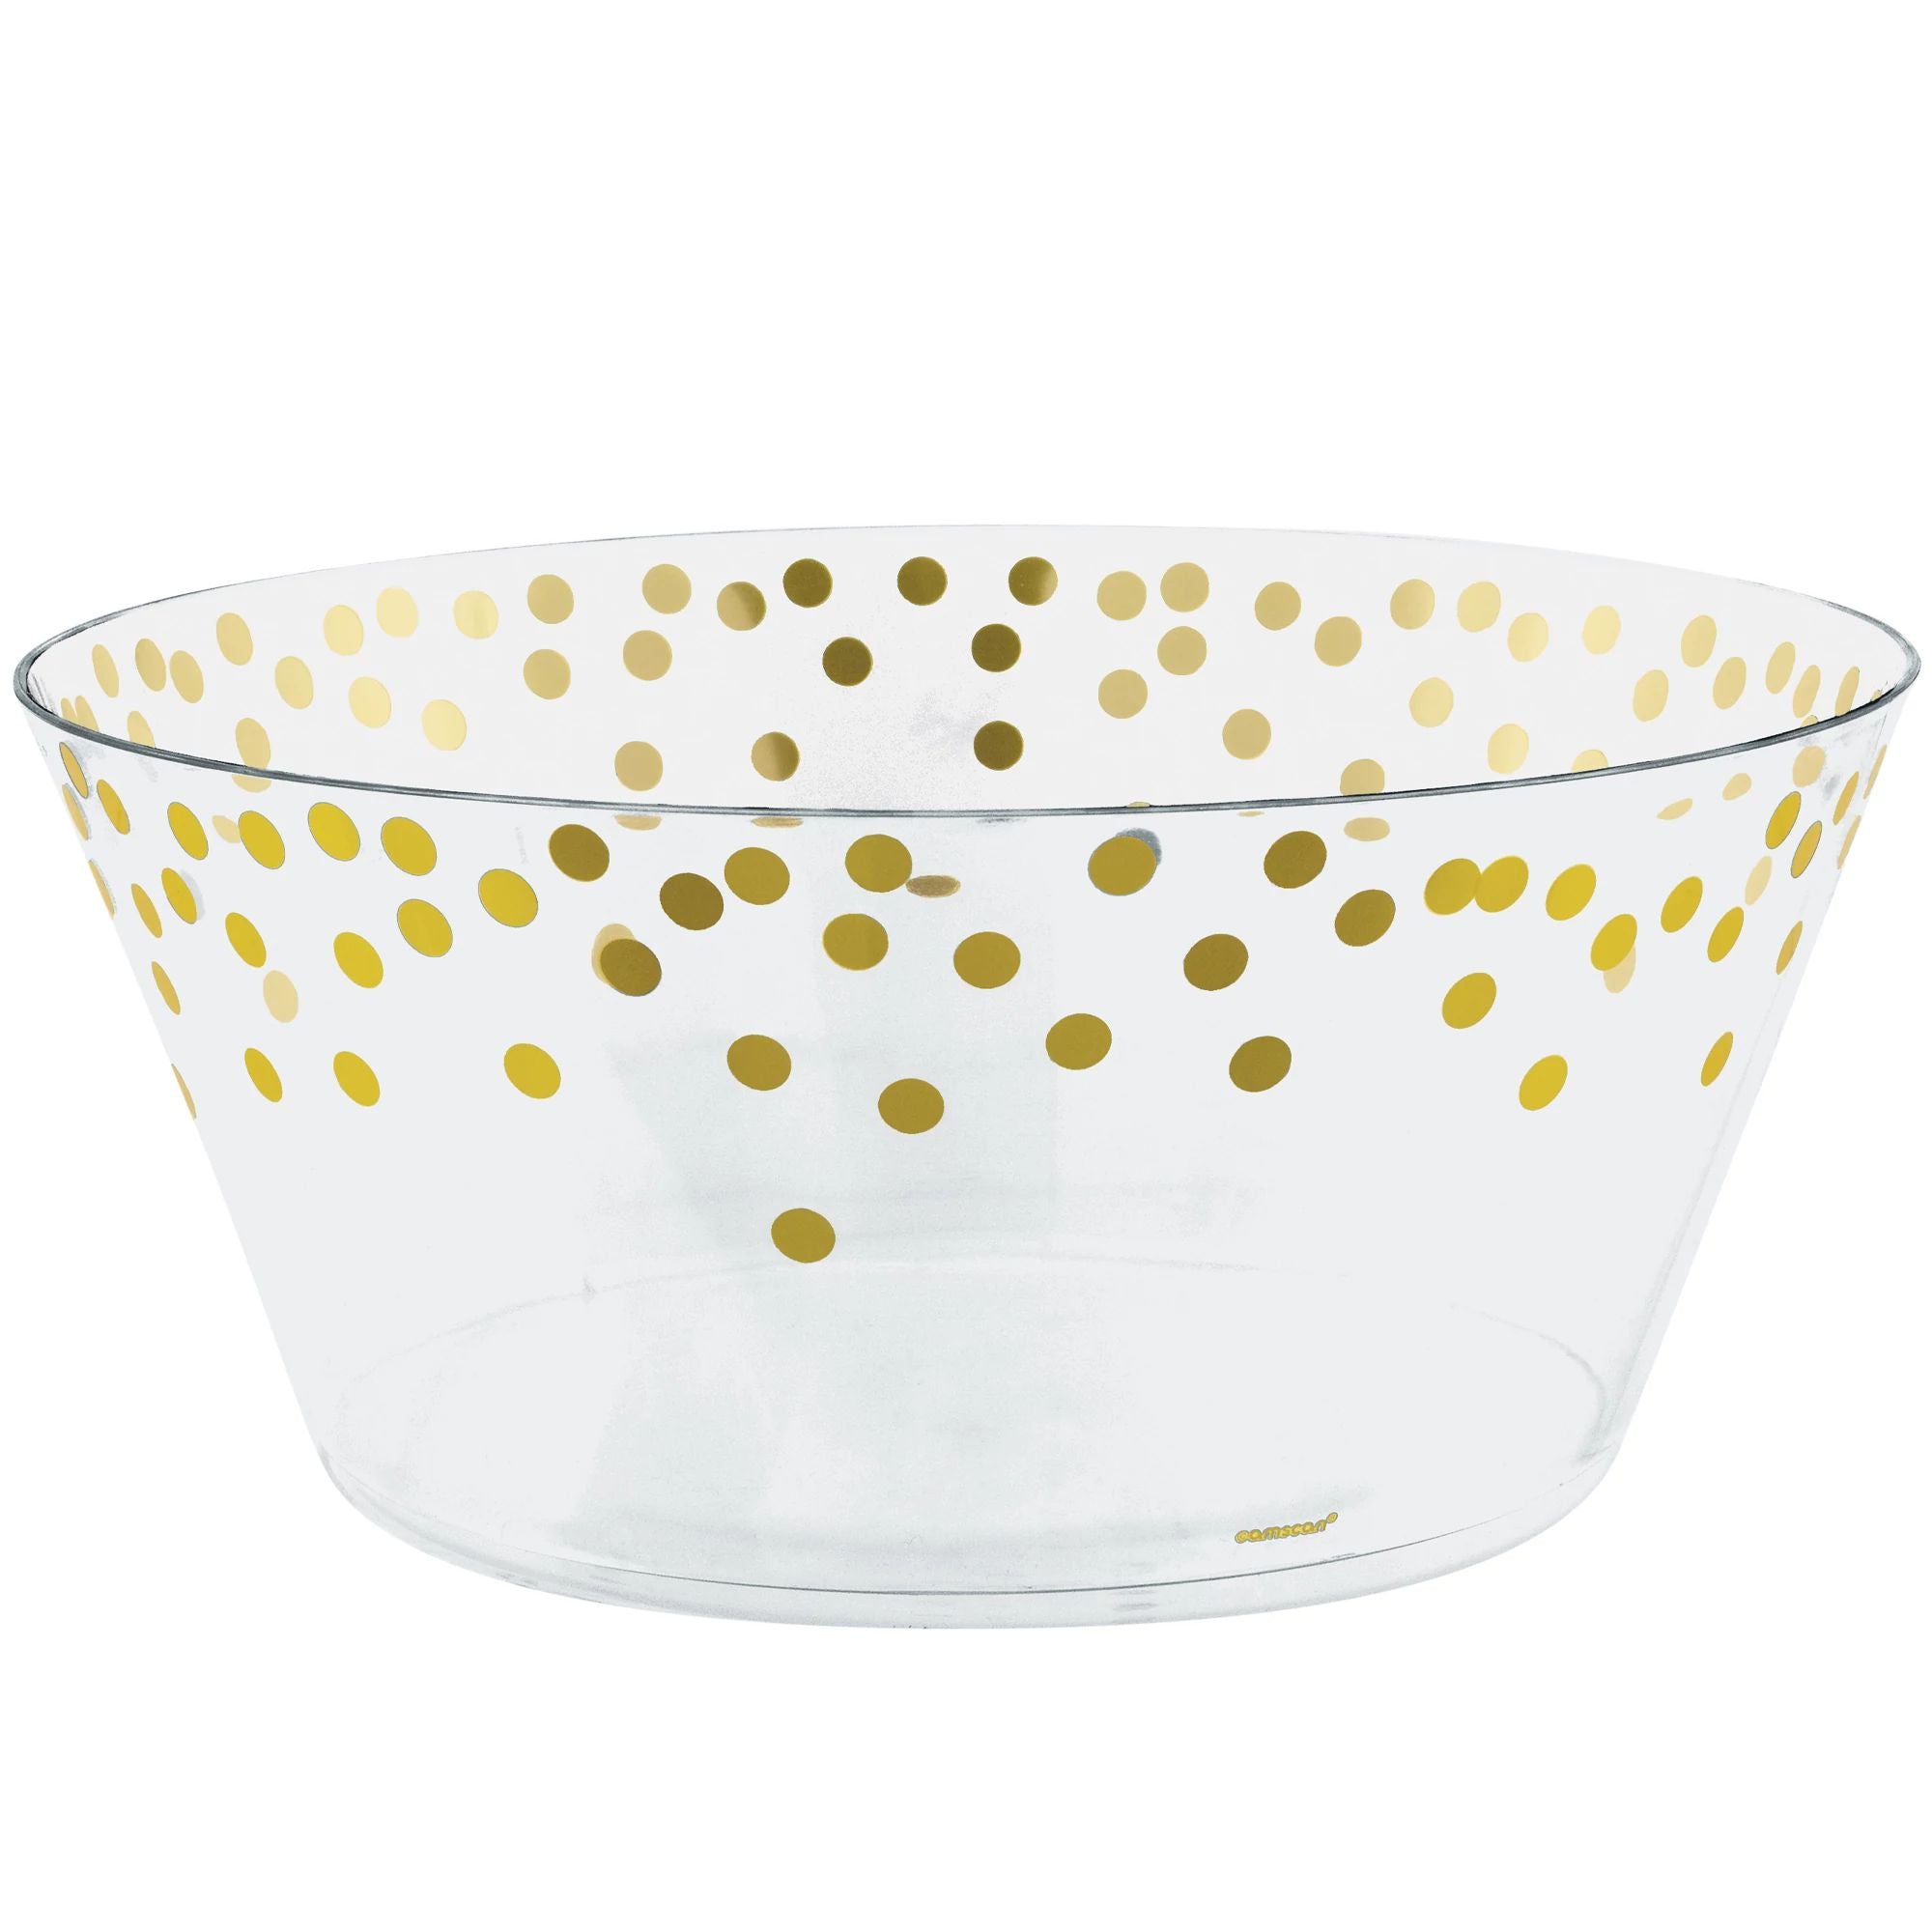 Large Serving Bowl, Recyclable - Gold Dots